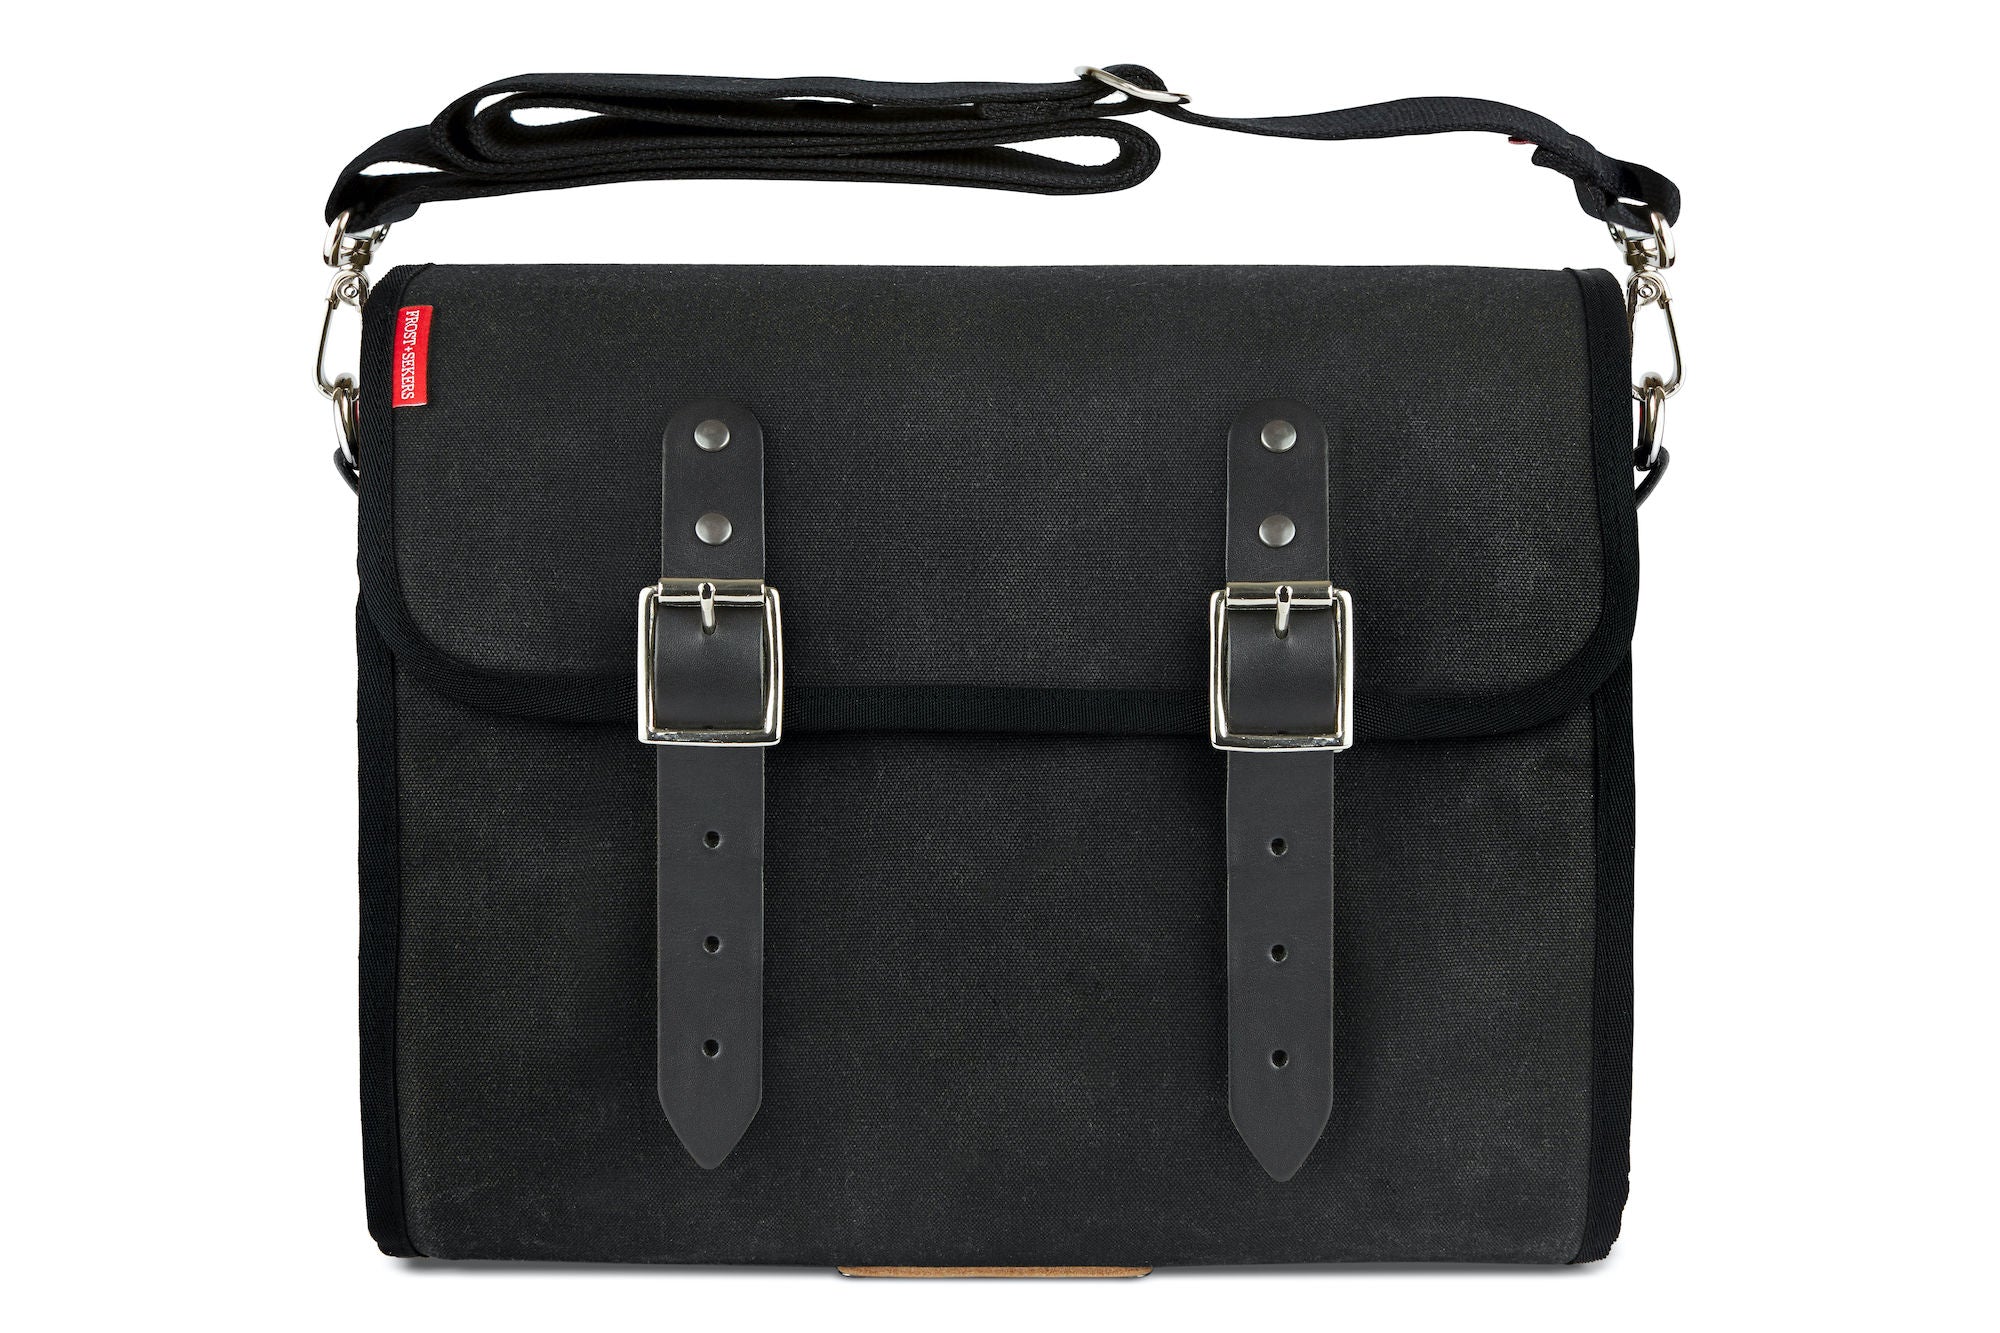 Frost and Sekers Marvin saddle bag. Black canvas with black leather.